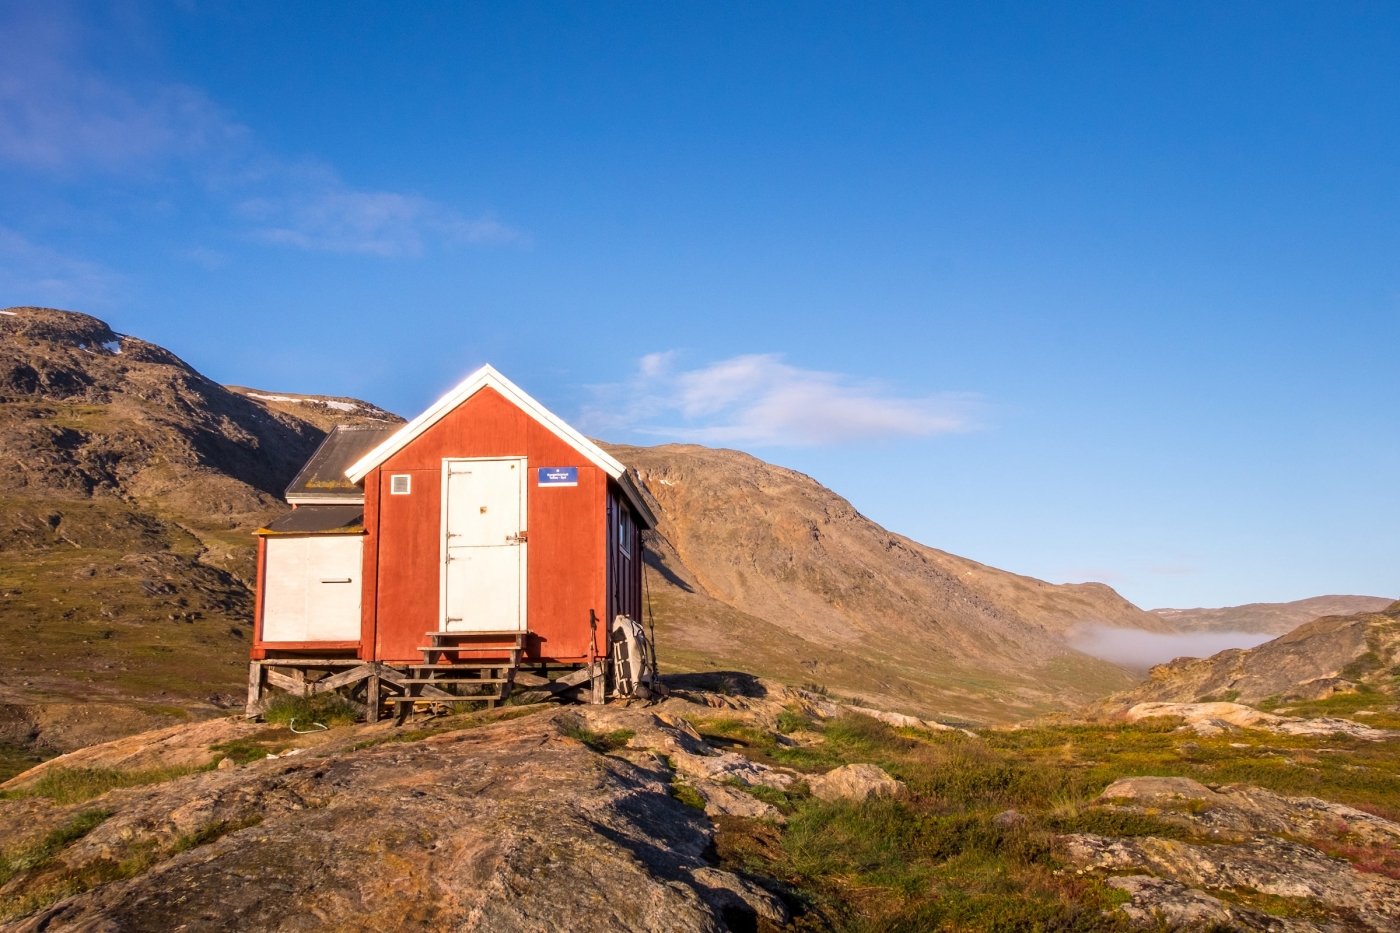 Exterior of Kangerluarsuk Tulleq Syd Hut- Day 8 of Arctic Circle Trail. Photo by Lisa Germany - Visit Greenland